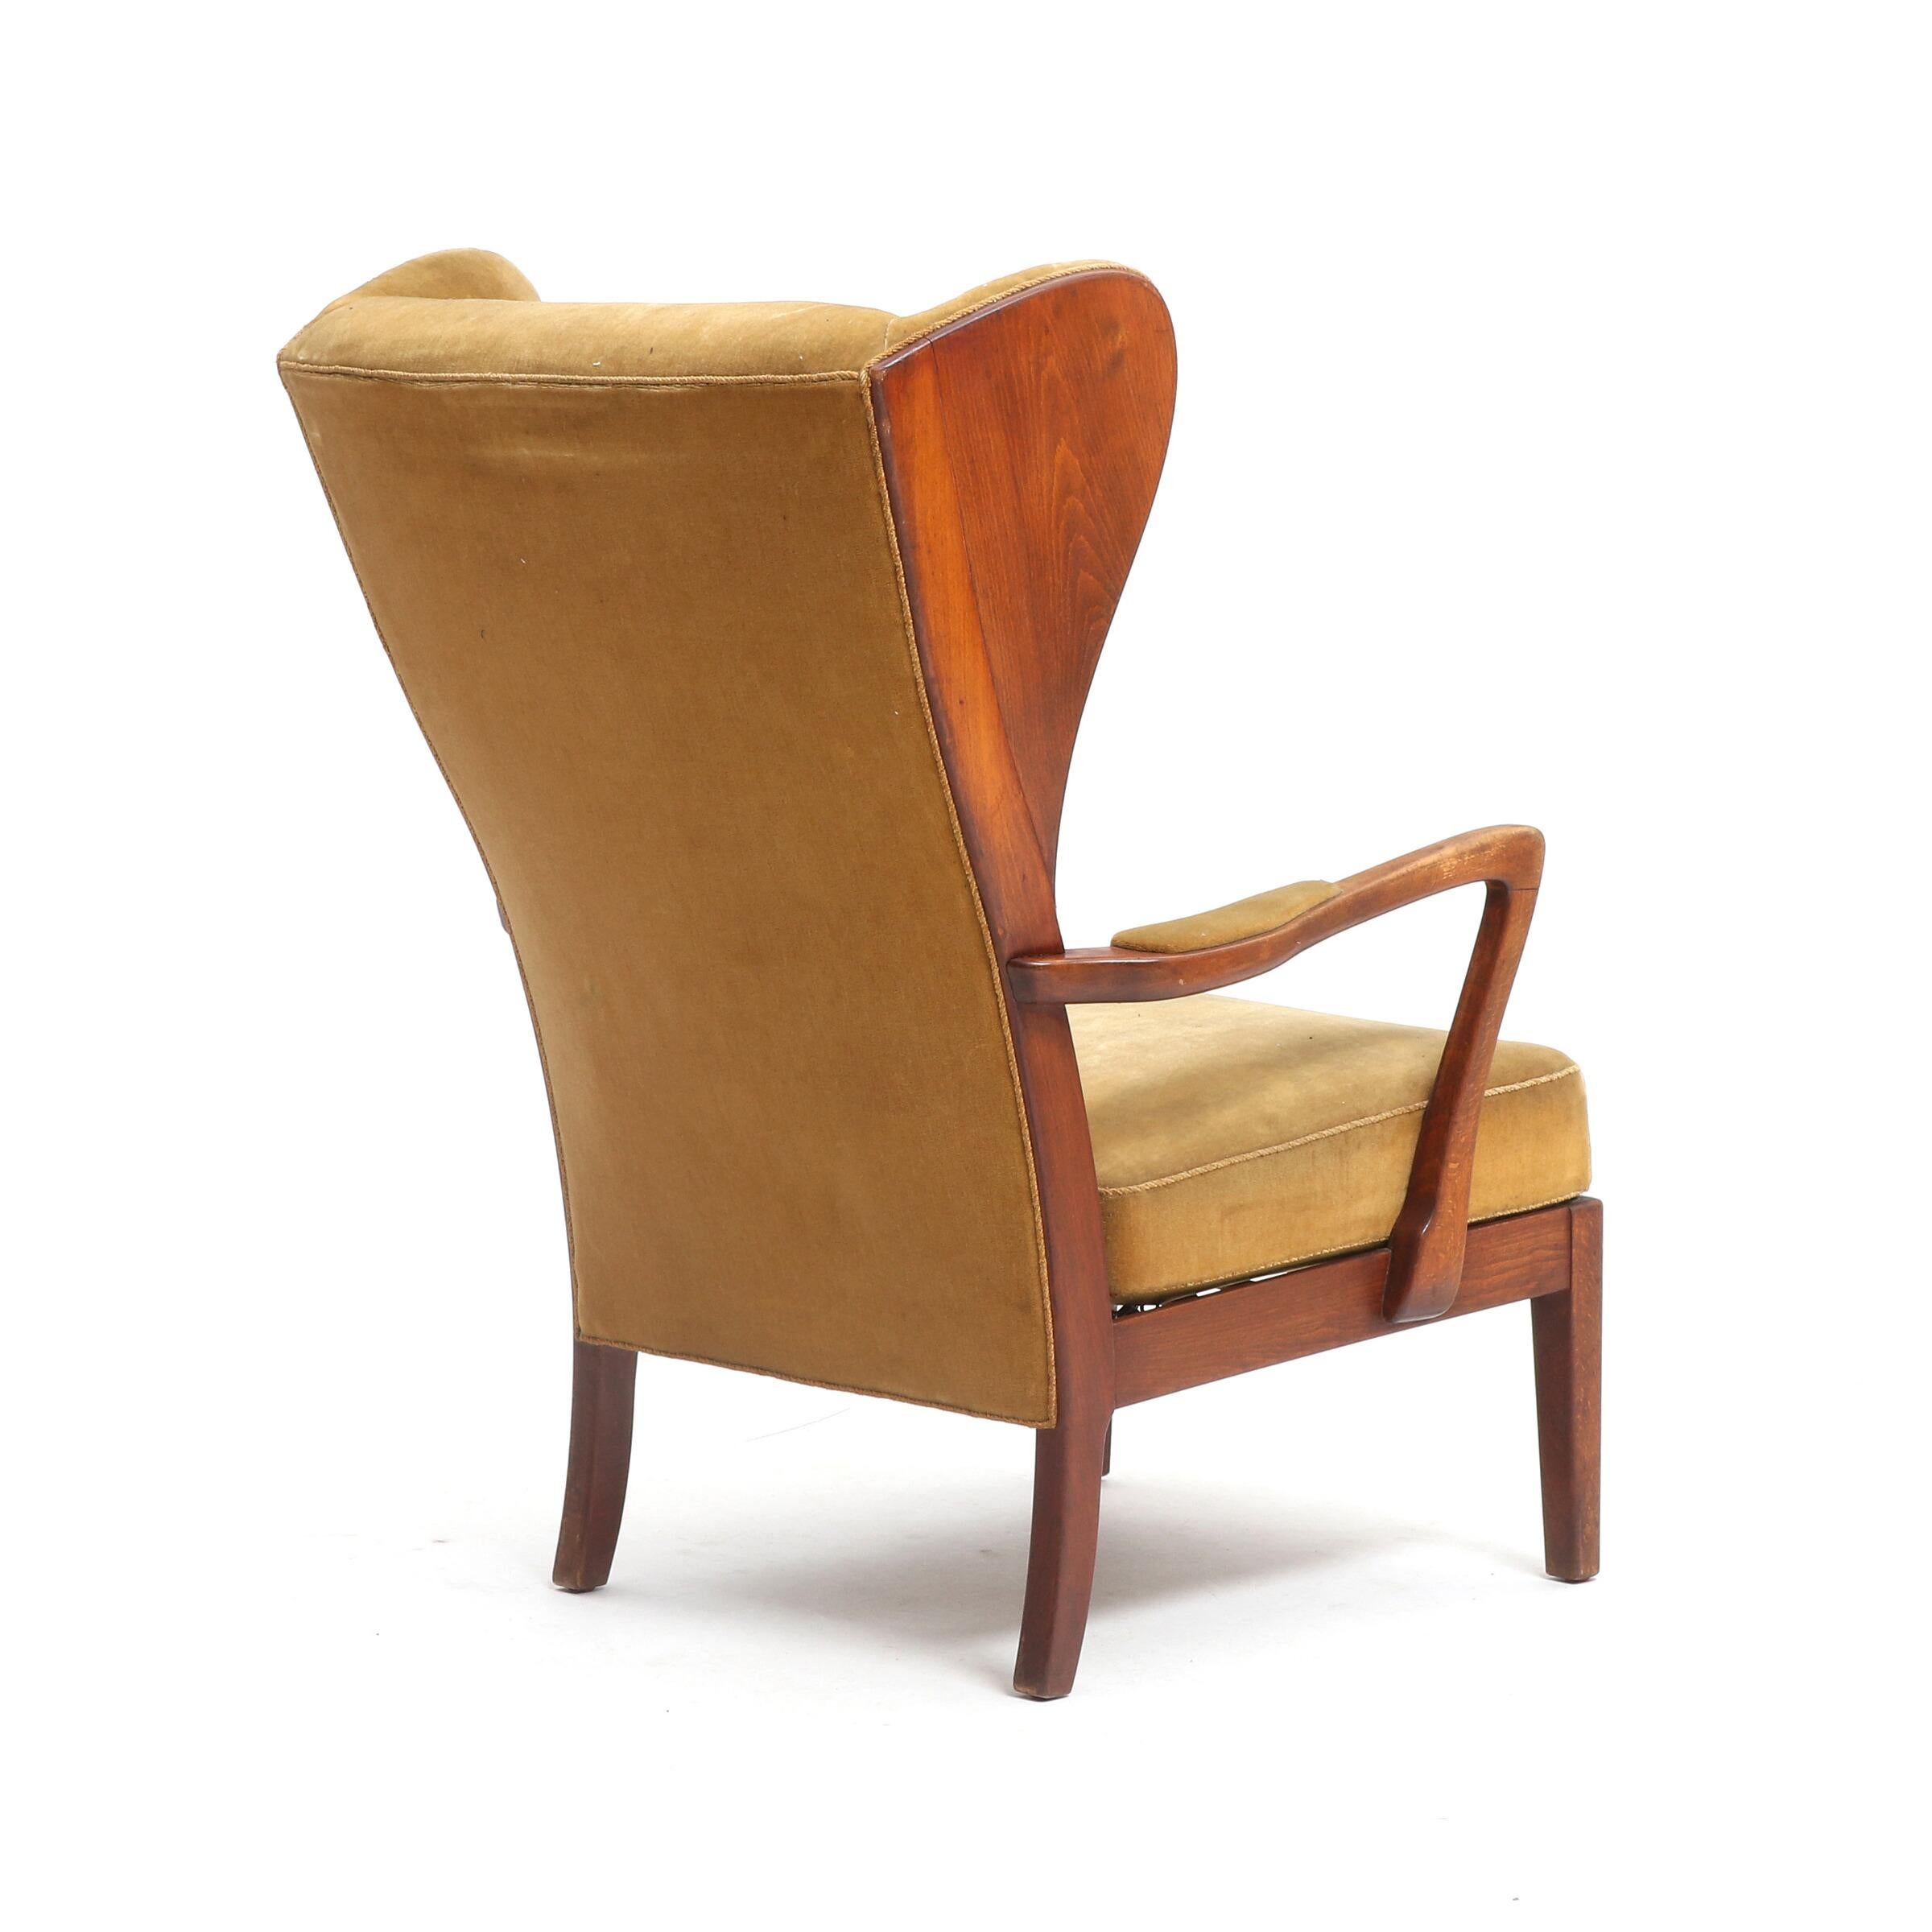 Danish cabinet maker, JUM-Stolen, wing-backed armchair with stained beech frame, seat and back upholstered with light wool, 1940s.